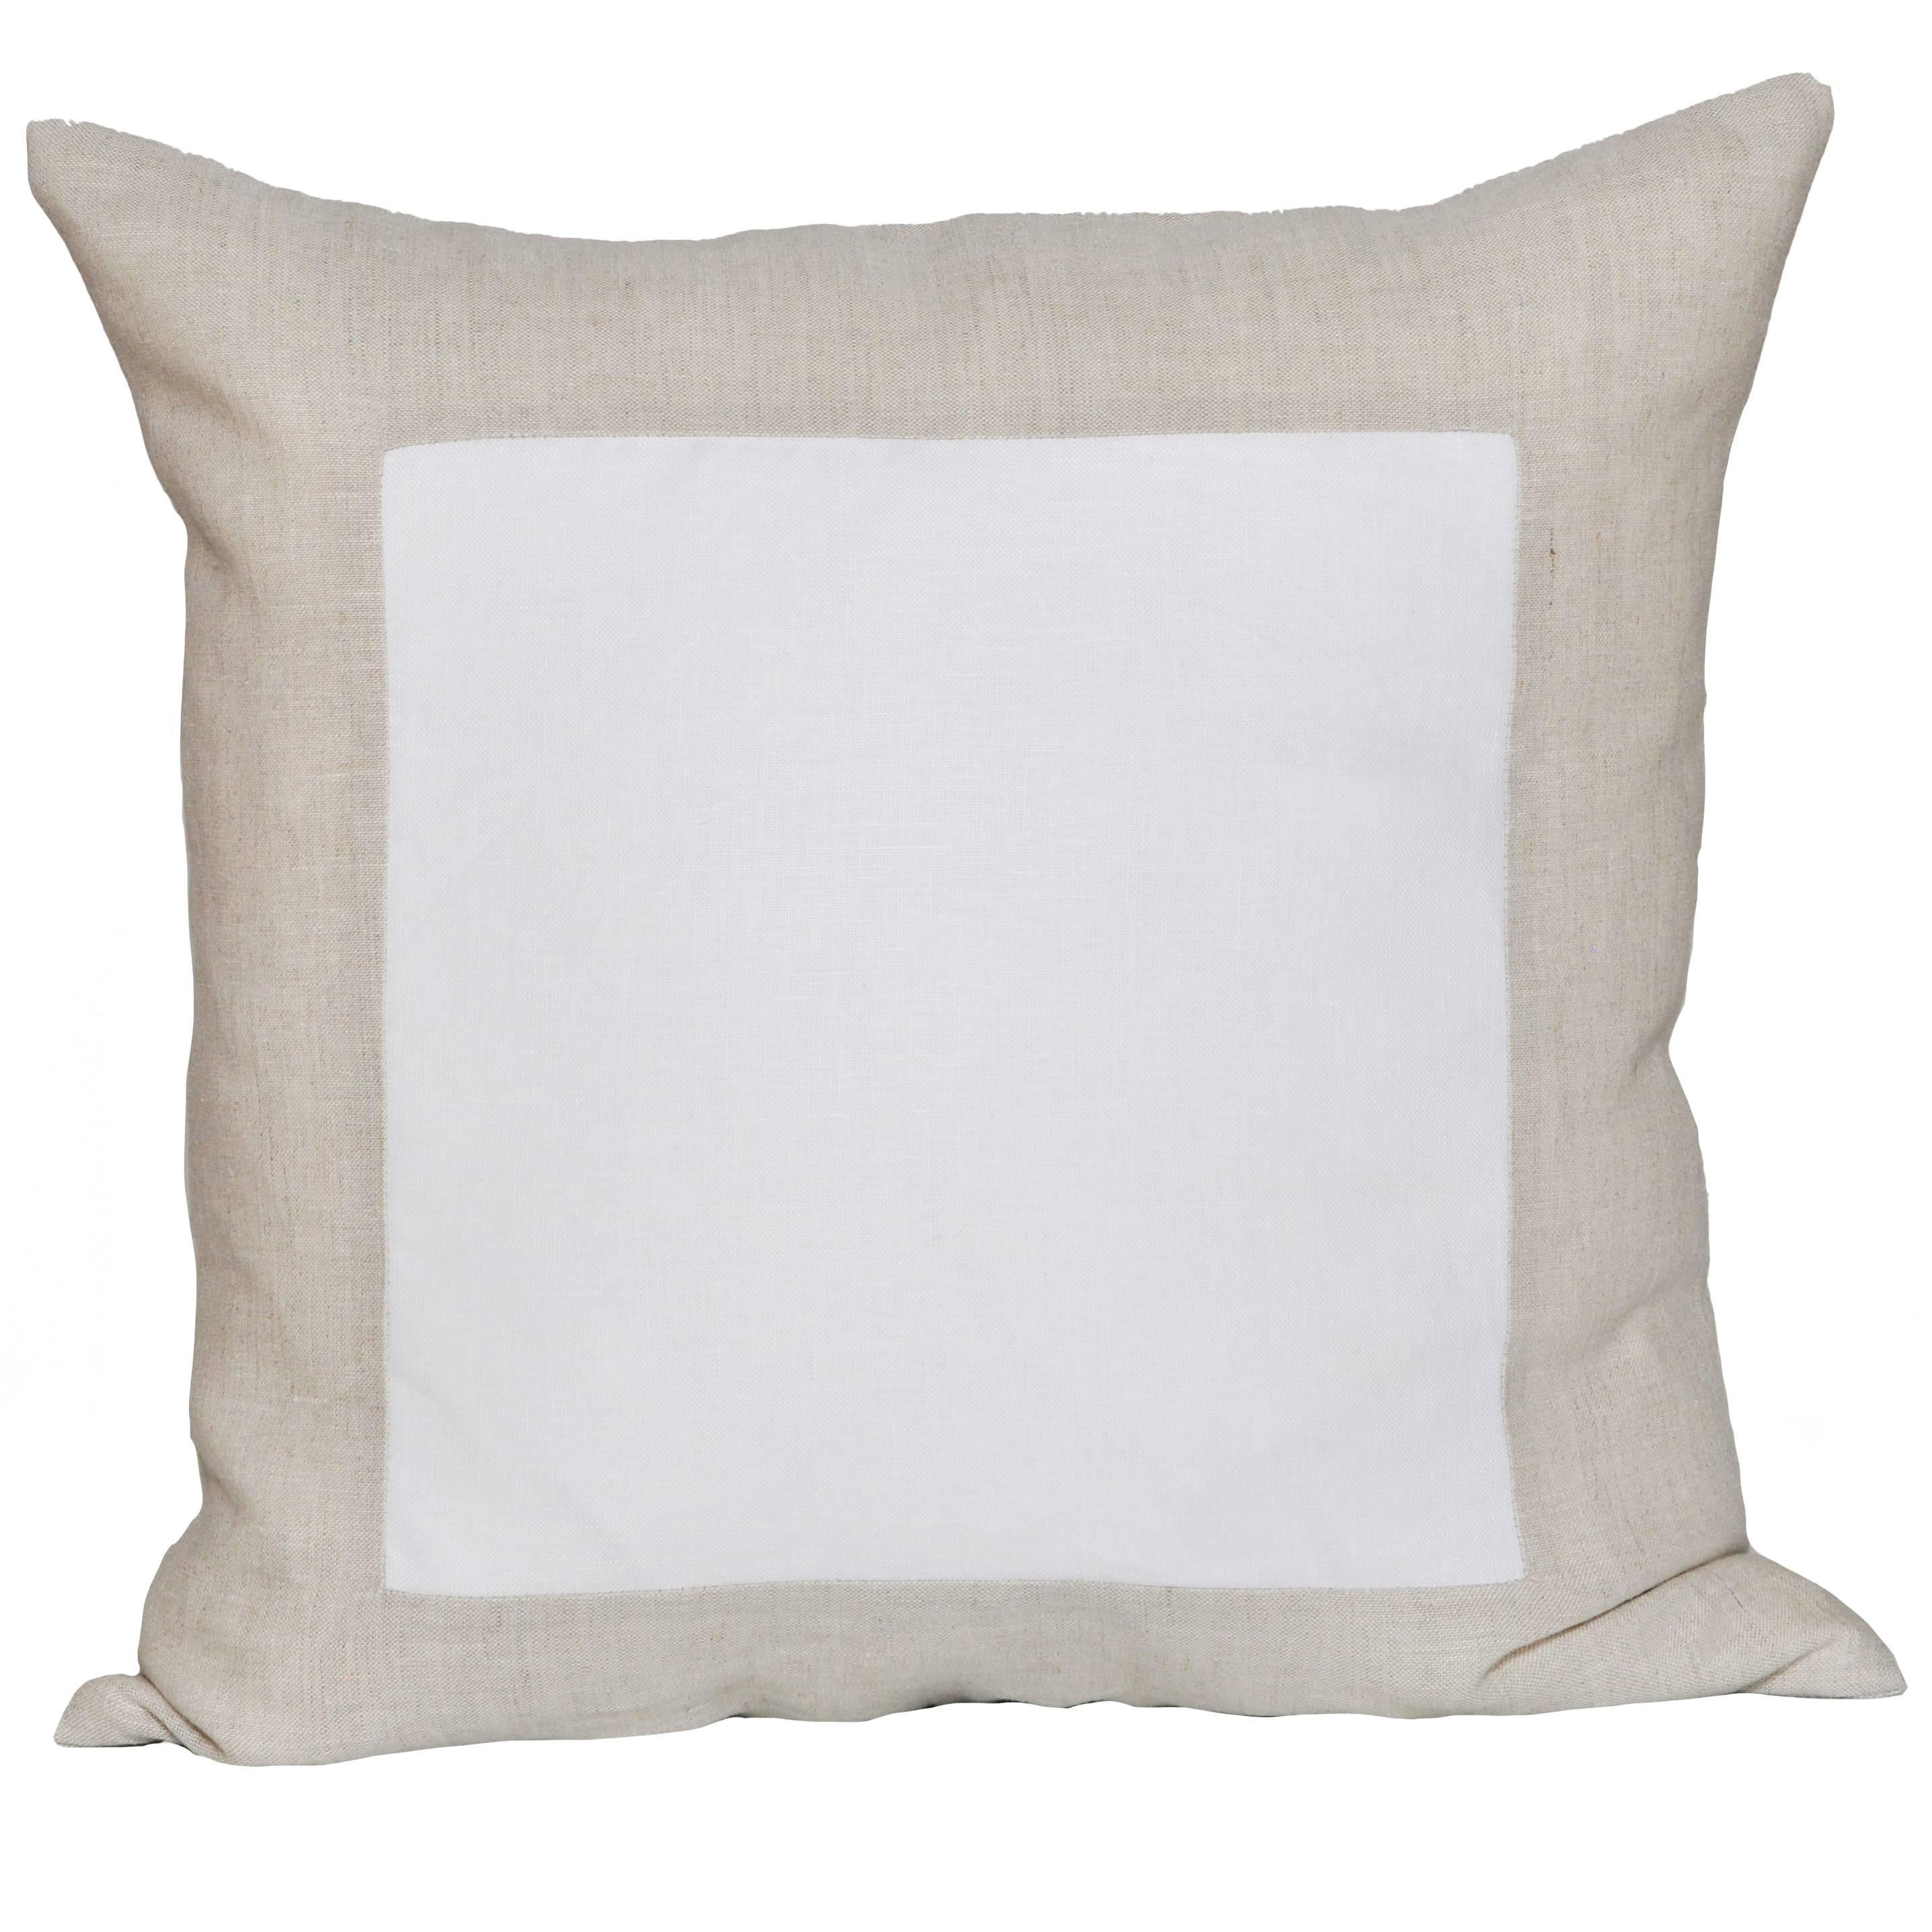 Large Patchwork Cushion in Vintage Irish Linen White Oatmeal Geometric Pillow For Sale